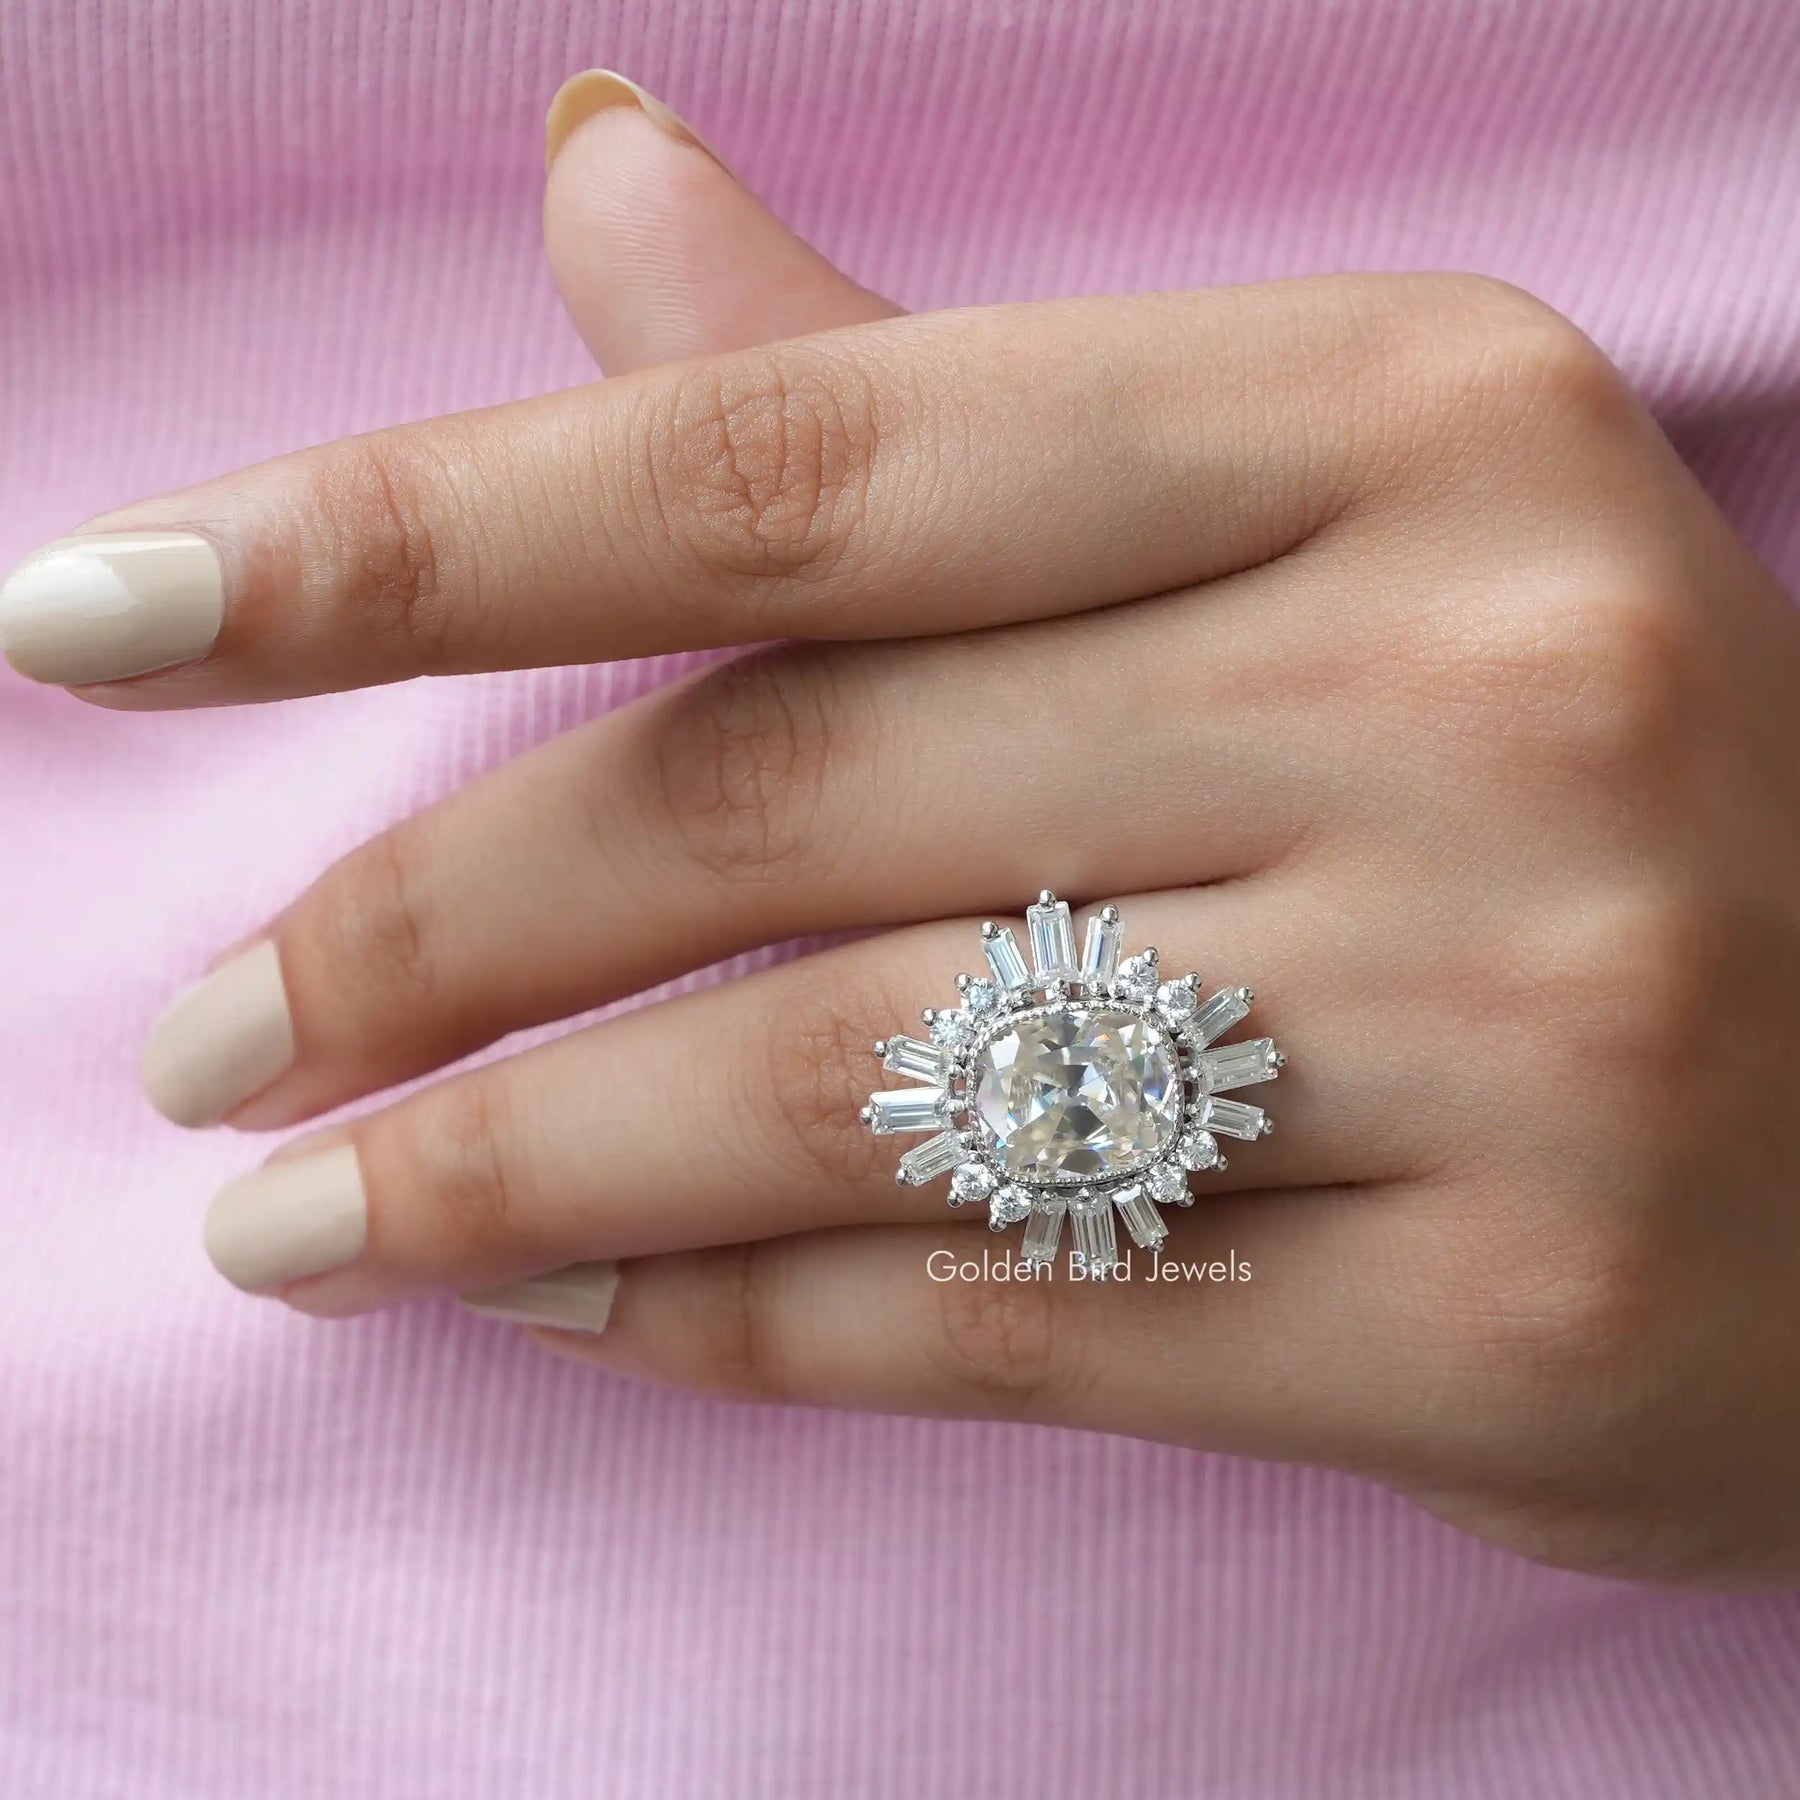 In Finger a Moissanite Engagement Ring Made Of Old Mine Cushion Cut]-[Golden Bird Jewels]